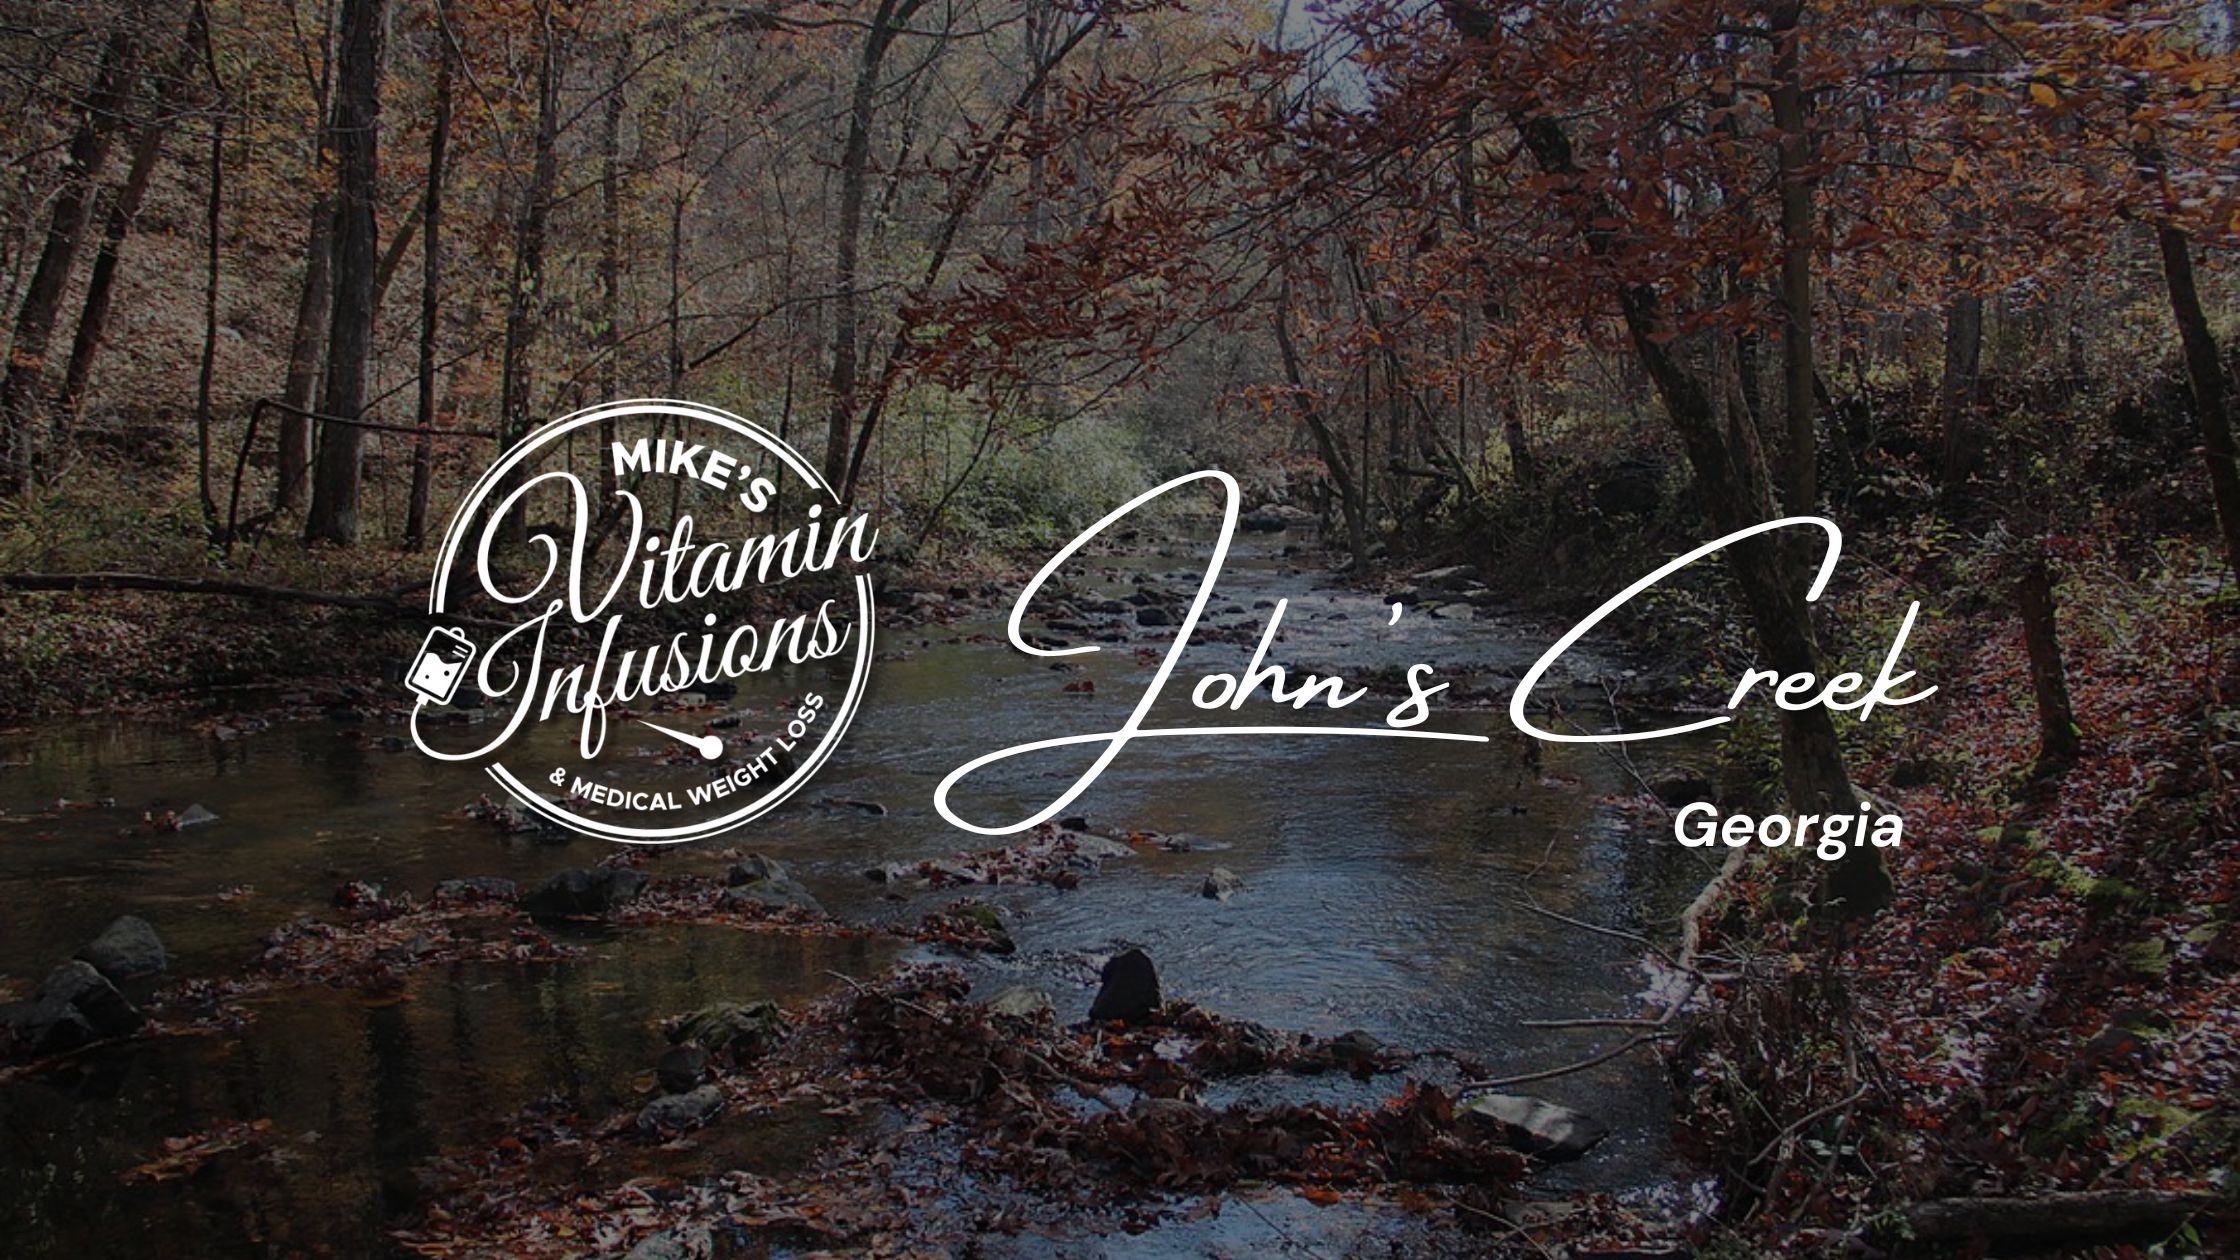 Image of a creek in John's Creek Georgia with the mike's vitamin infusions logo